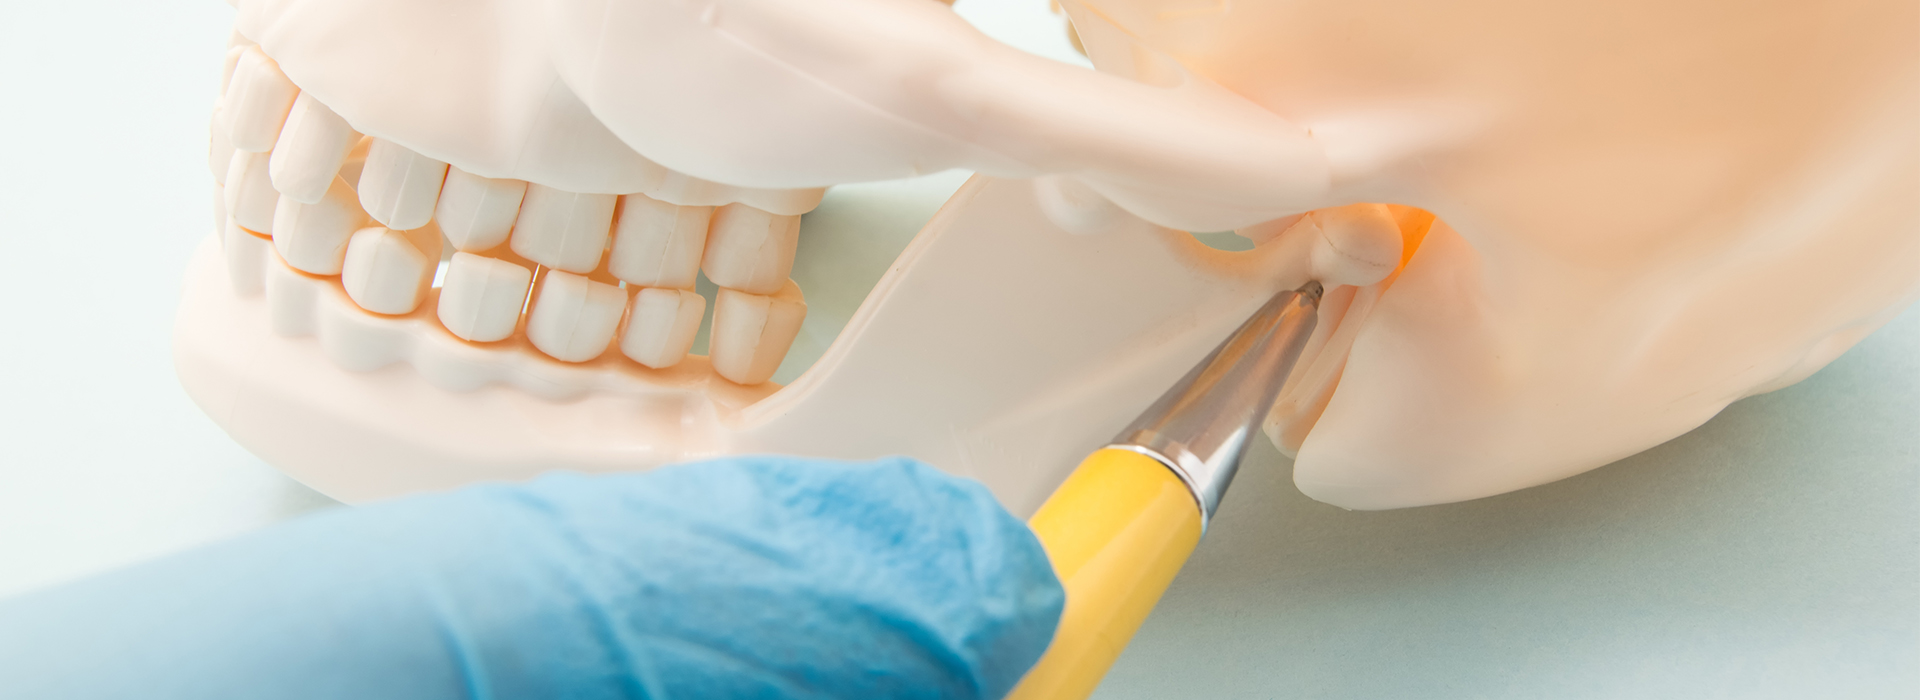 Wohl and Trail Periodontics and Dental Implants | Bruxism Treatment, Soft Tissue Grafts and Multiple Teeth Implants